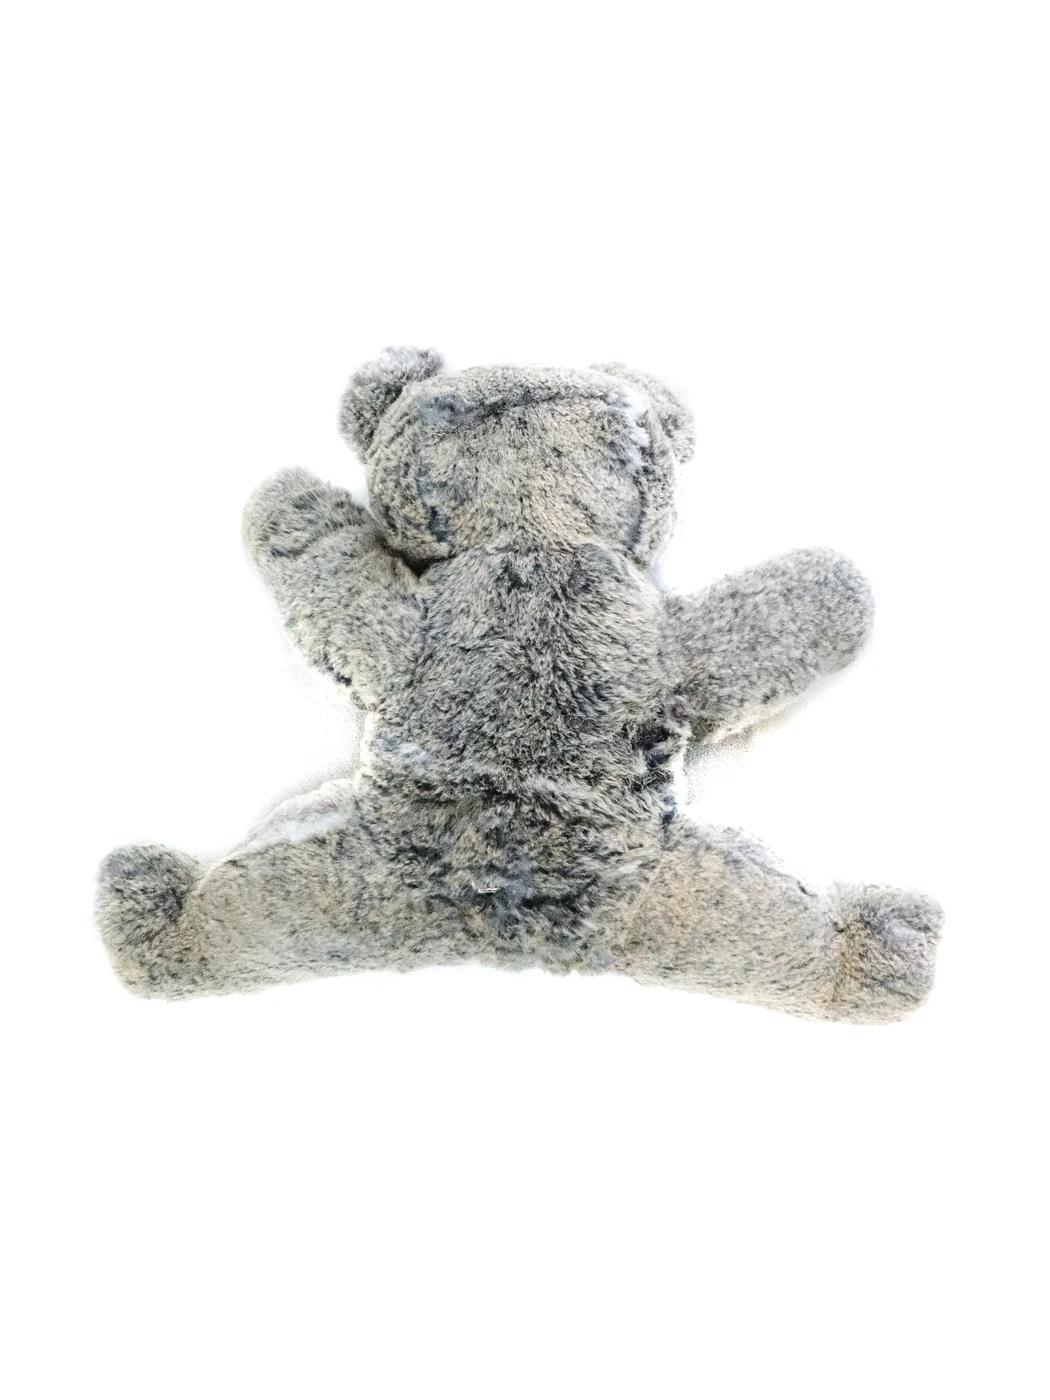 Here is a crazy Coyote Fur Teddy Bear from Chrome Hearts. This Teddy Bear is made with 100% coyote fur and sterling silver hardware. It is INSANELY soft.

Much bigger than your typical teddy bear. It's bigger than my cat.